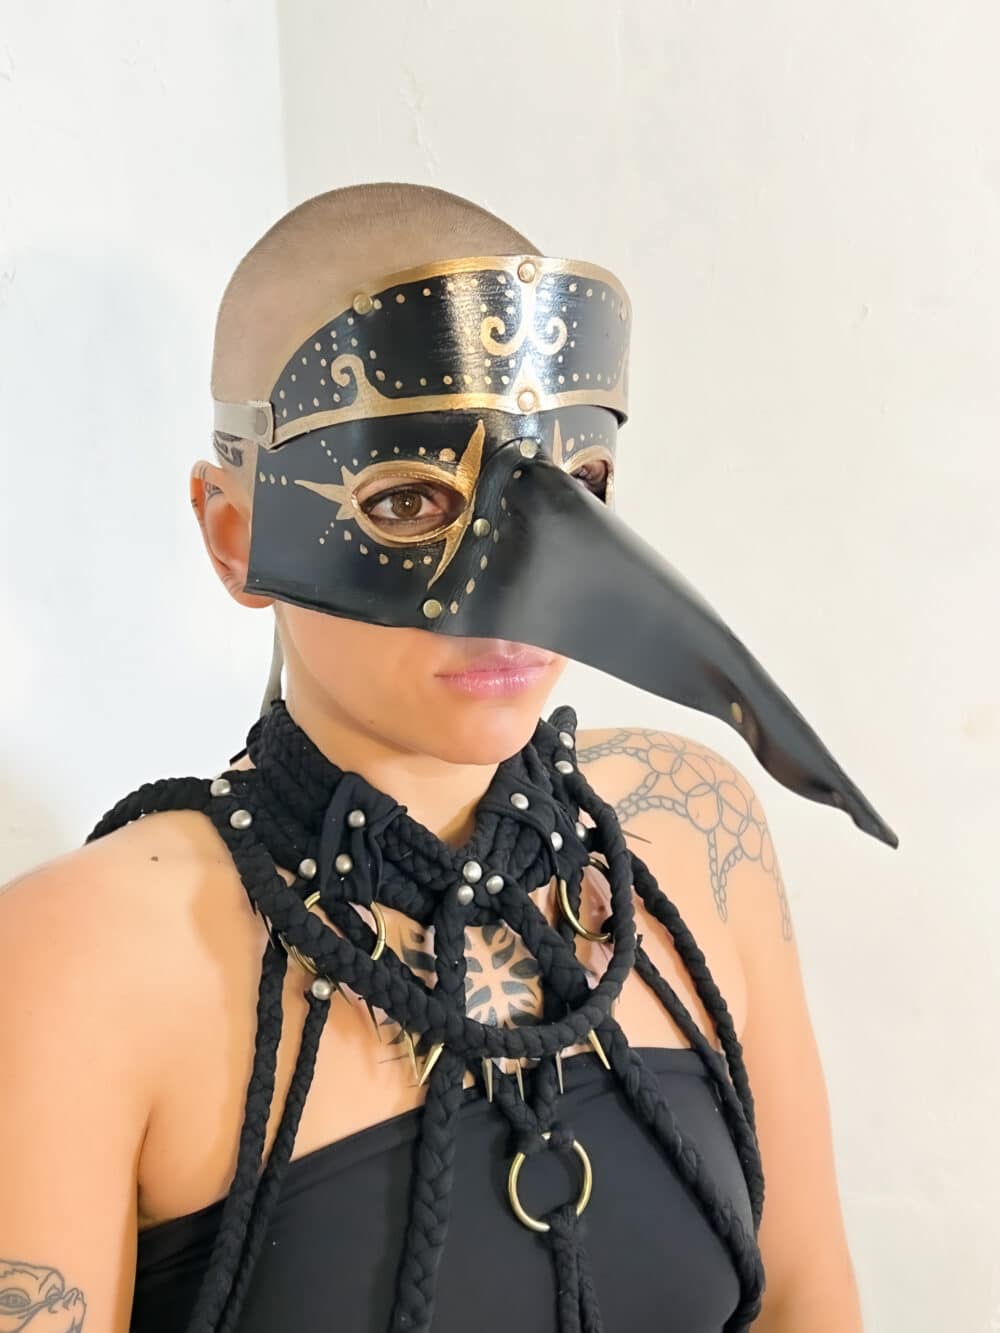 A woman model showcasing a handmade, black leather mask, that has a large beak that extends about 8 inches from the middle of the mask. This mask features eye holes, as well as gold-painted accents; a tan leather strap can be seen on the side wrapping around the head: this is the straps that tie together to hold the mask on the face.